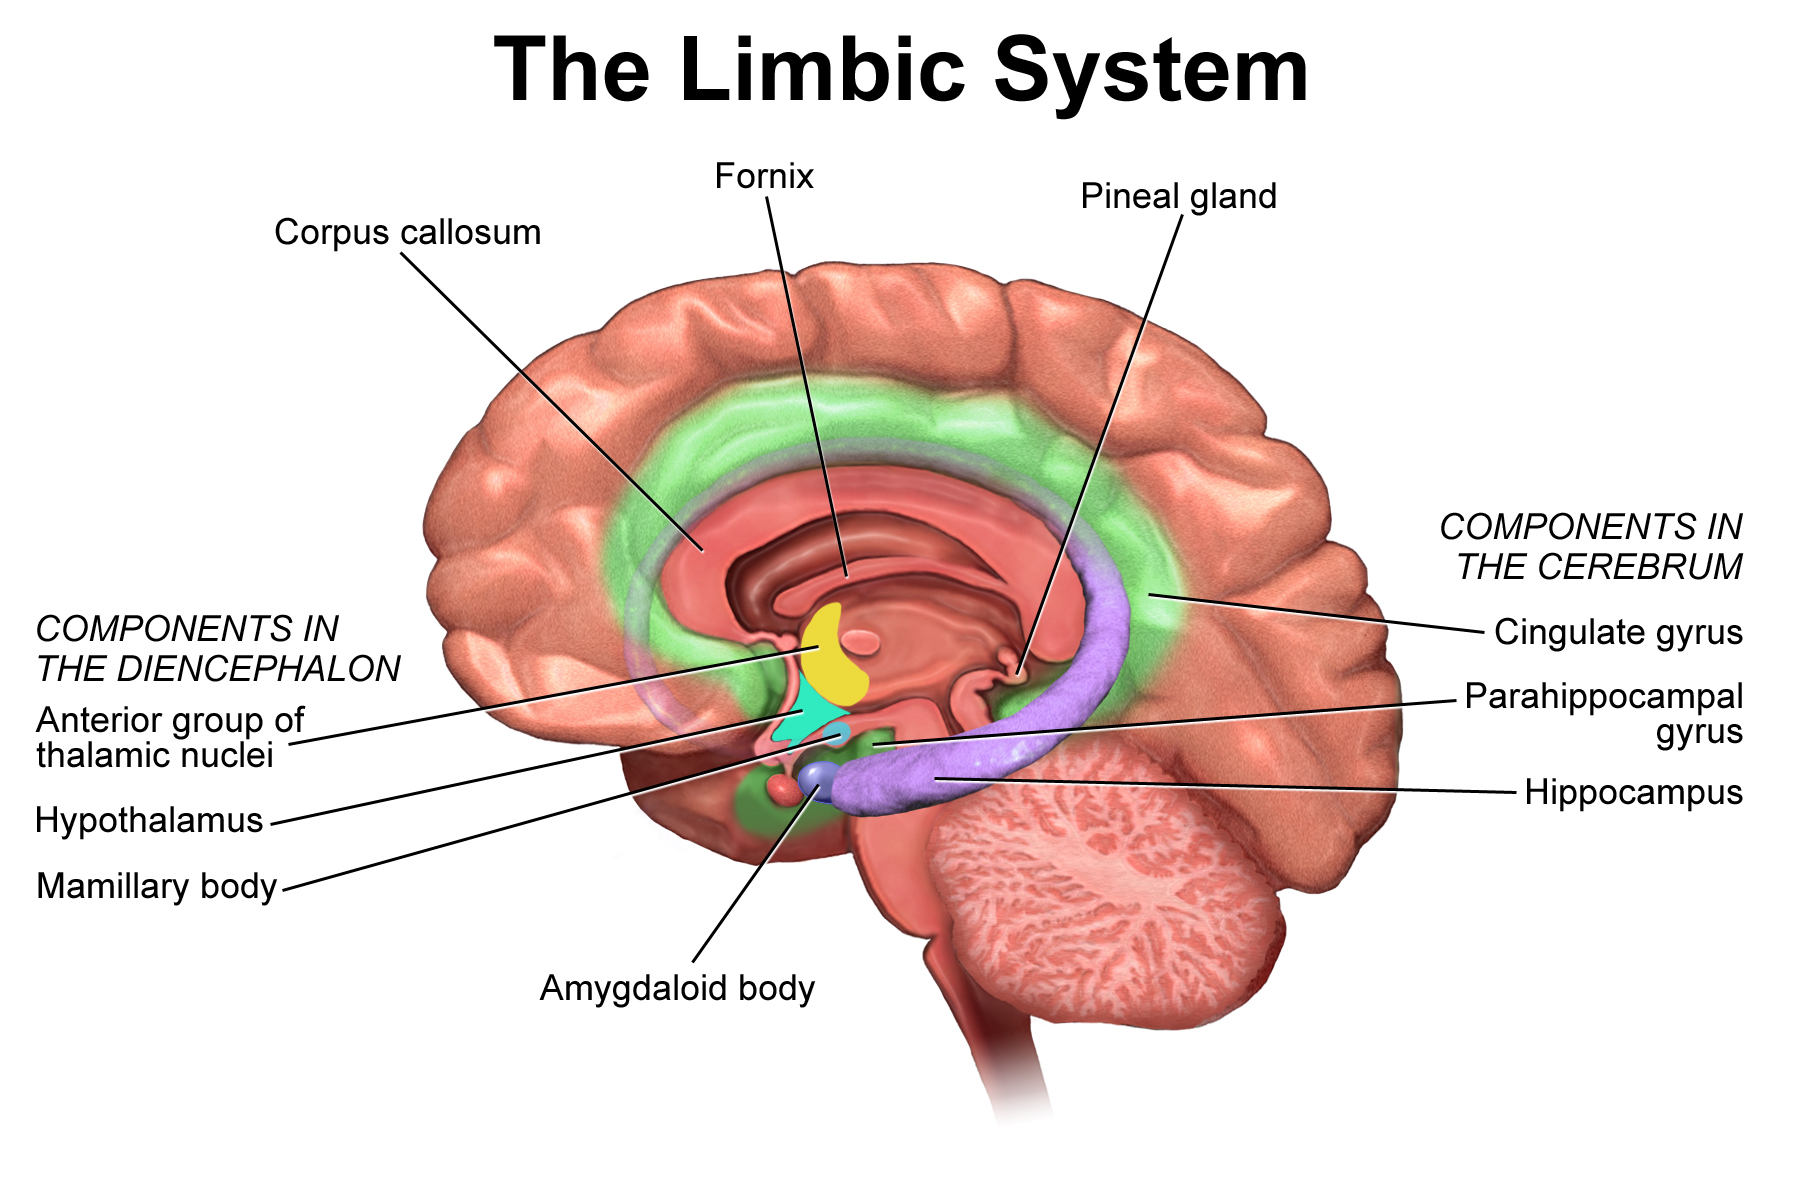 Diagram of the limbic system- all labeled structures are listed in the caption